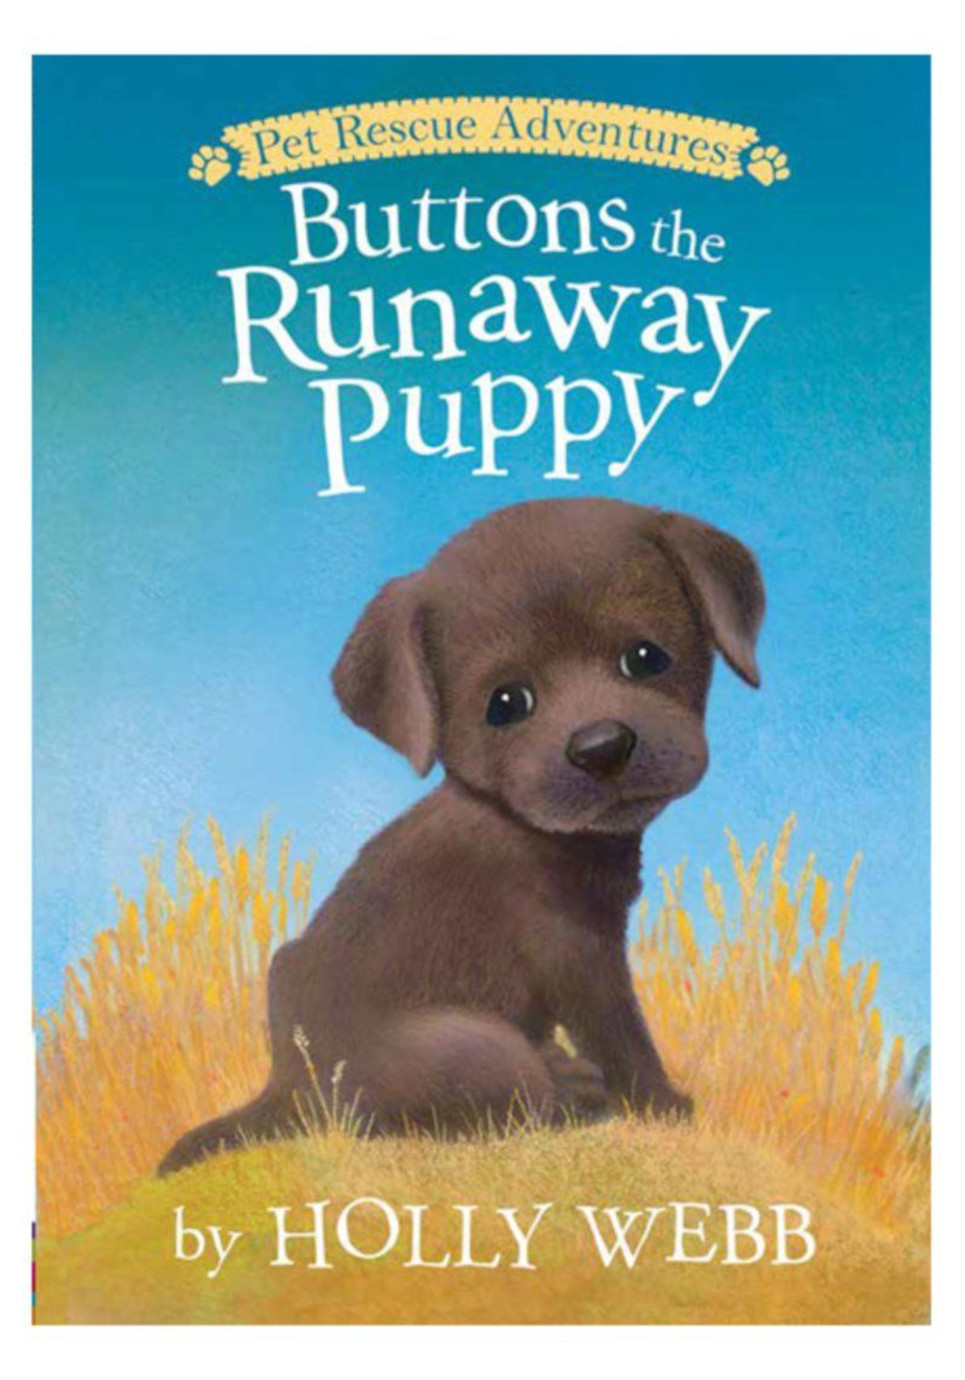 Buttons the Runaway Puppy (Holly Webb, 2017)